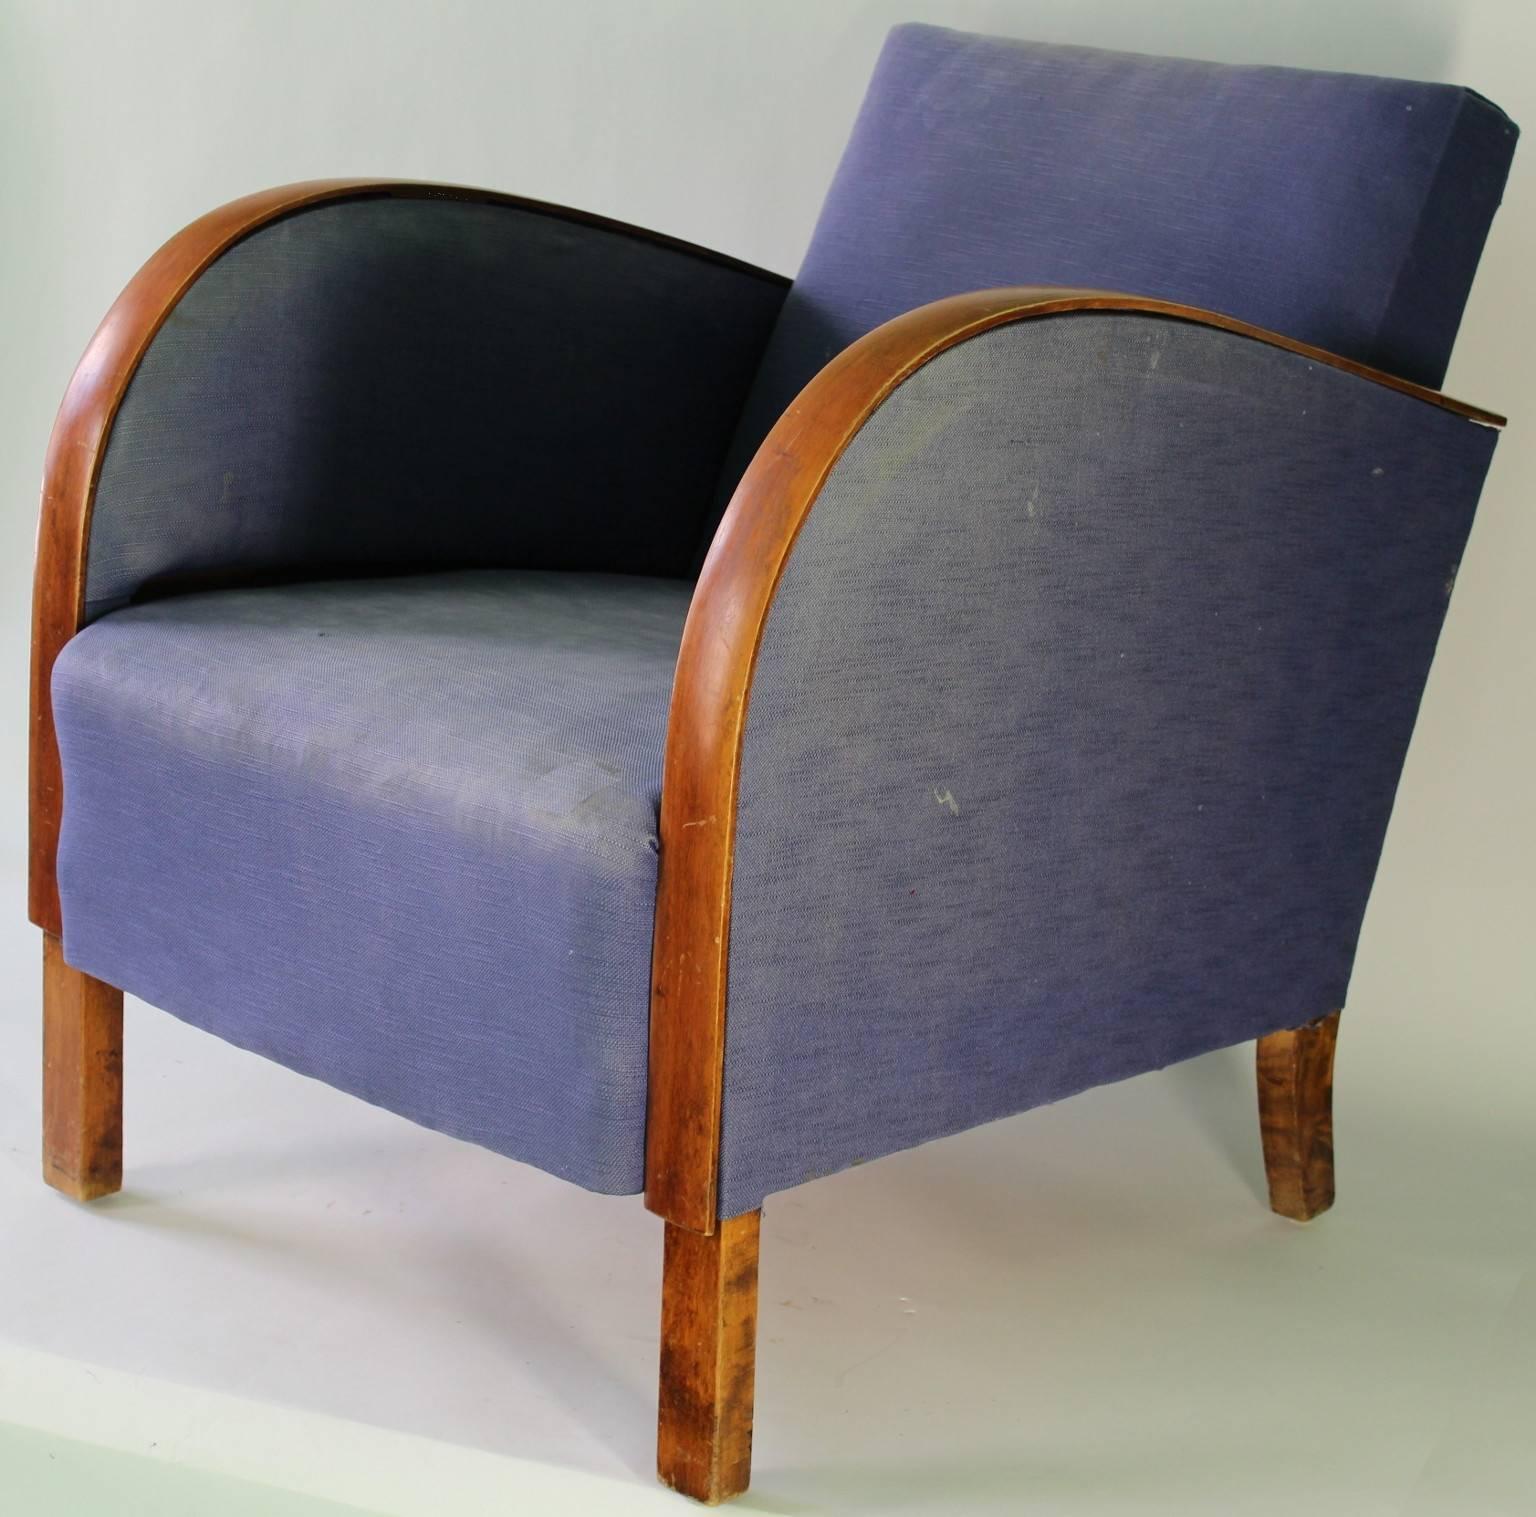 A pair of vintage, Art Deco club armchairs from the 1930s, back and seat upholstered in original blue fabric, with curved armrests on slanted legs. Fair vintage condition, with age appropriate wear; requires new upholstery.

9388